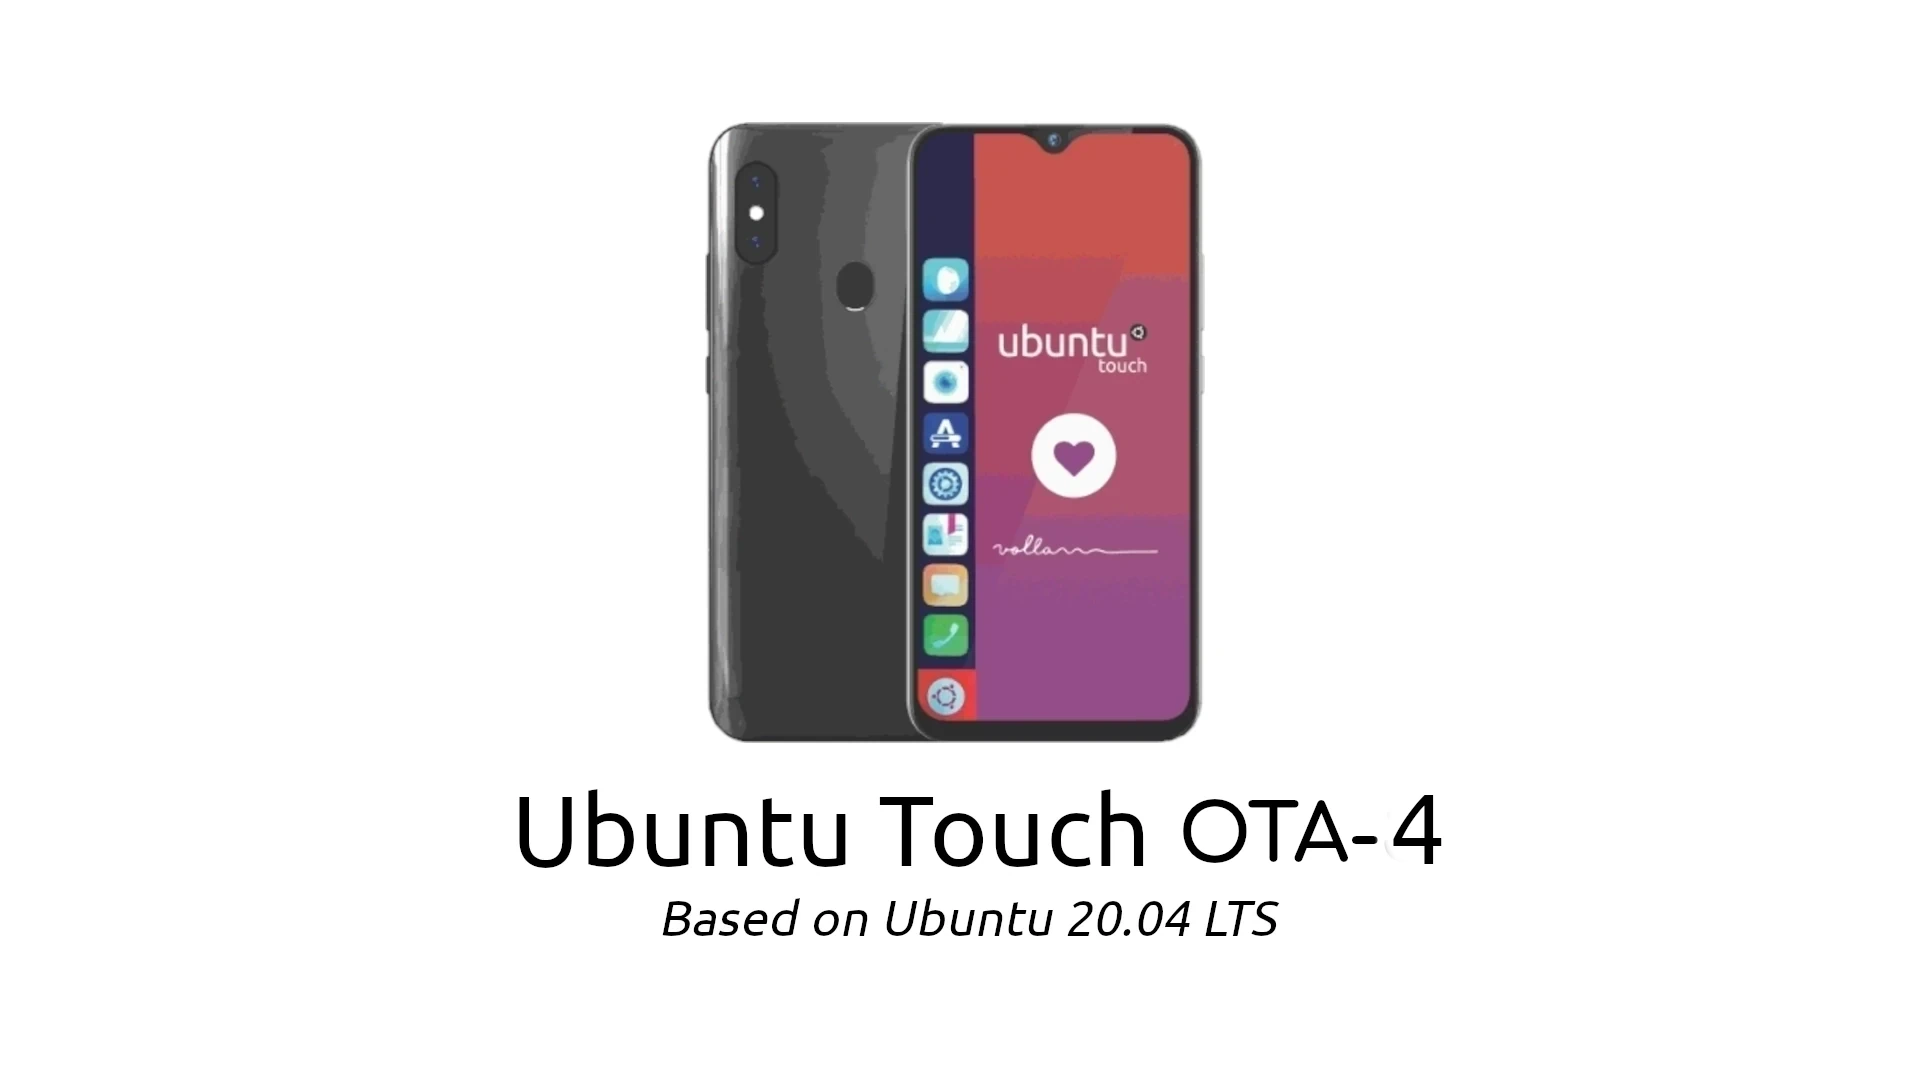 Ubuntu Touch OTA-4 Rolls Out to Linux Phone Users with Various Improvements